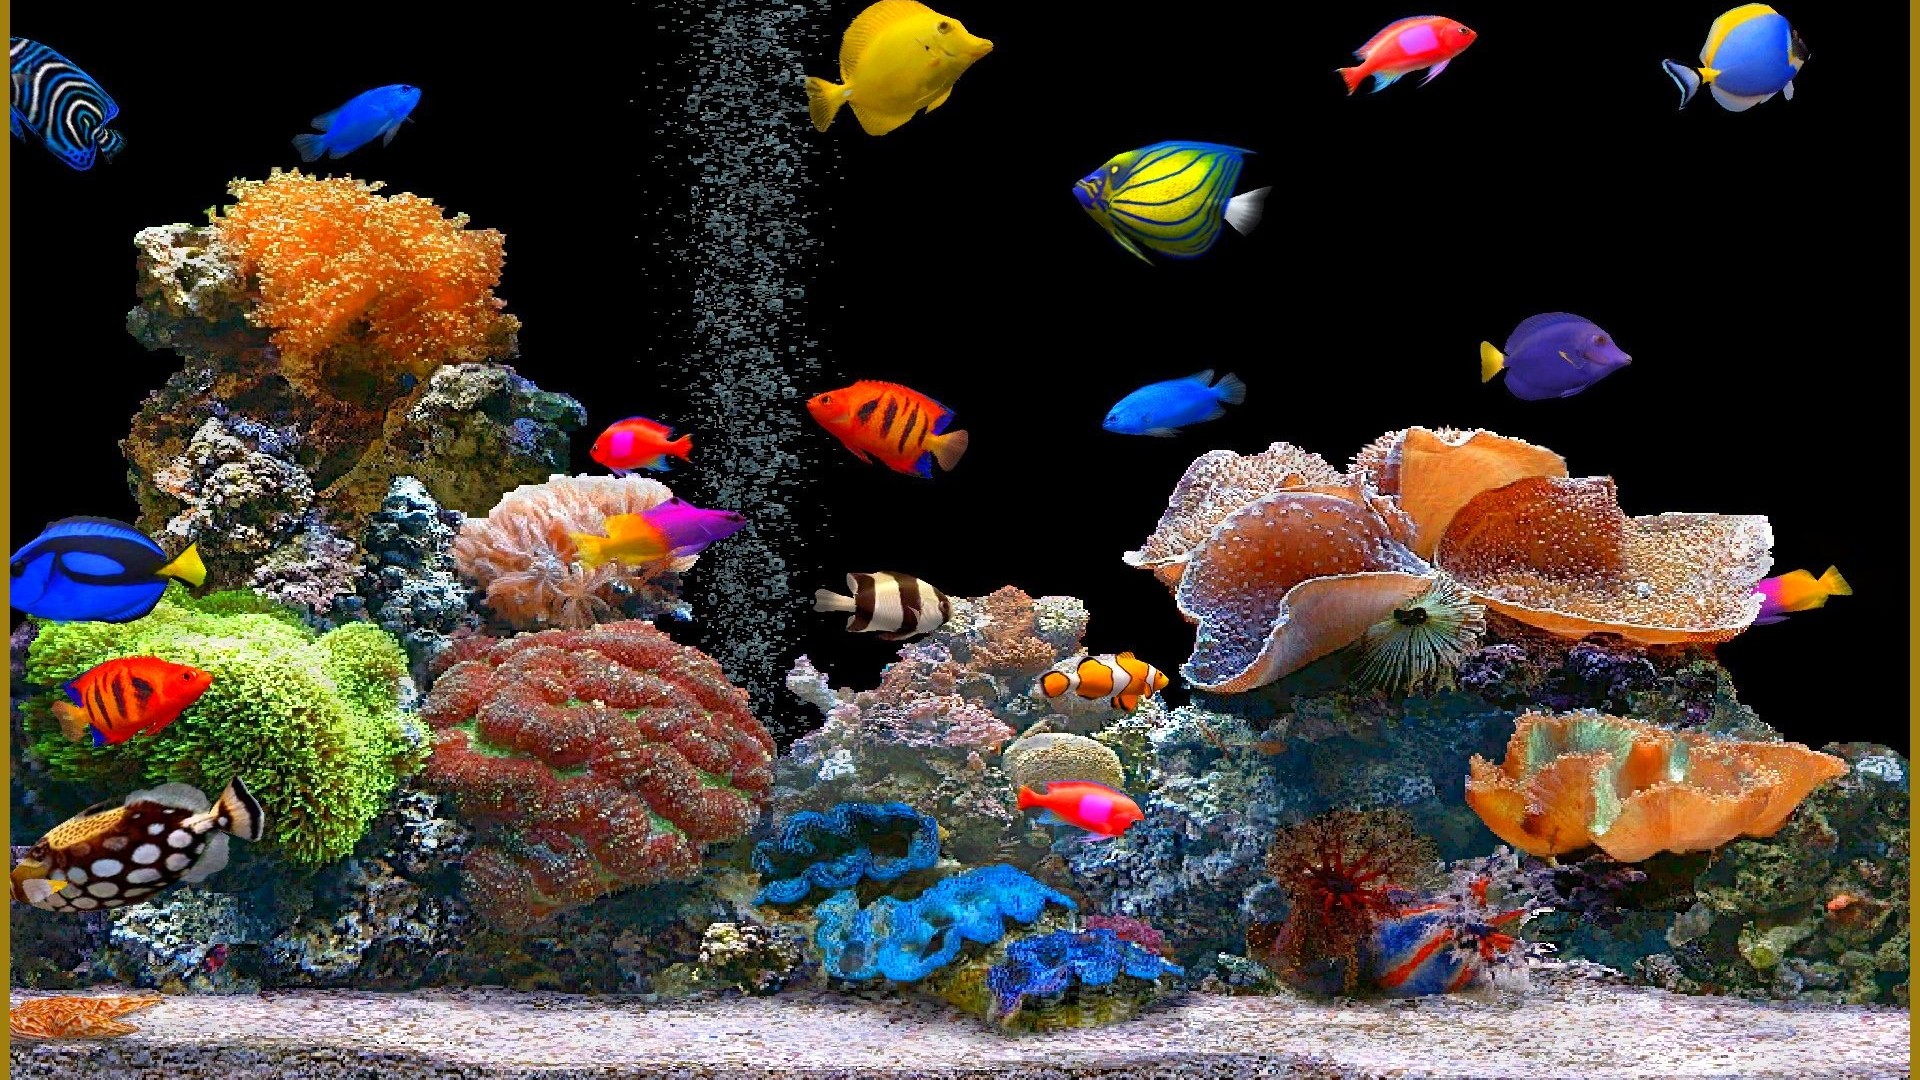 Free download and install Animated Fish Desktop Wallpaper there will